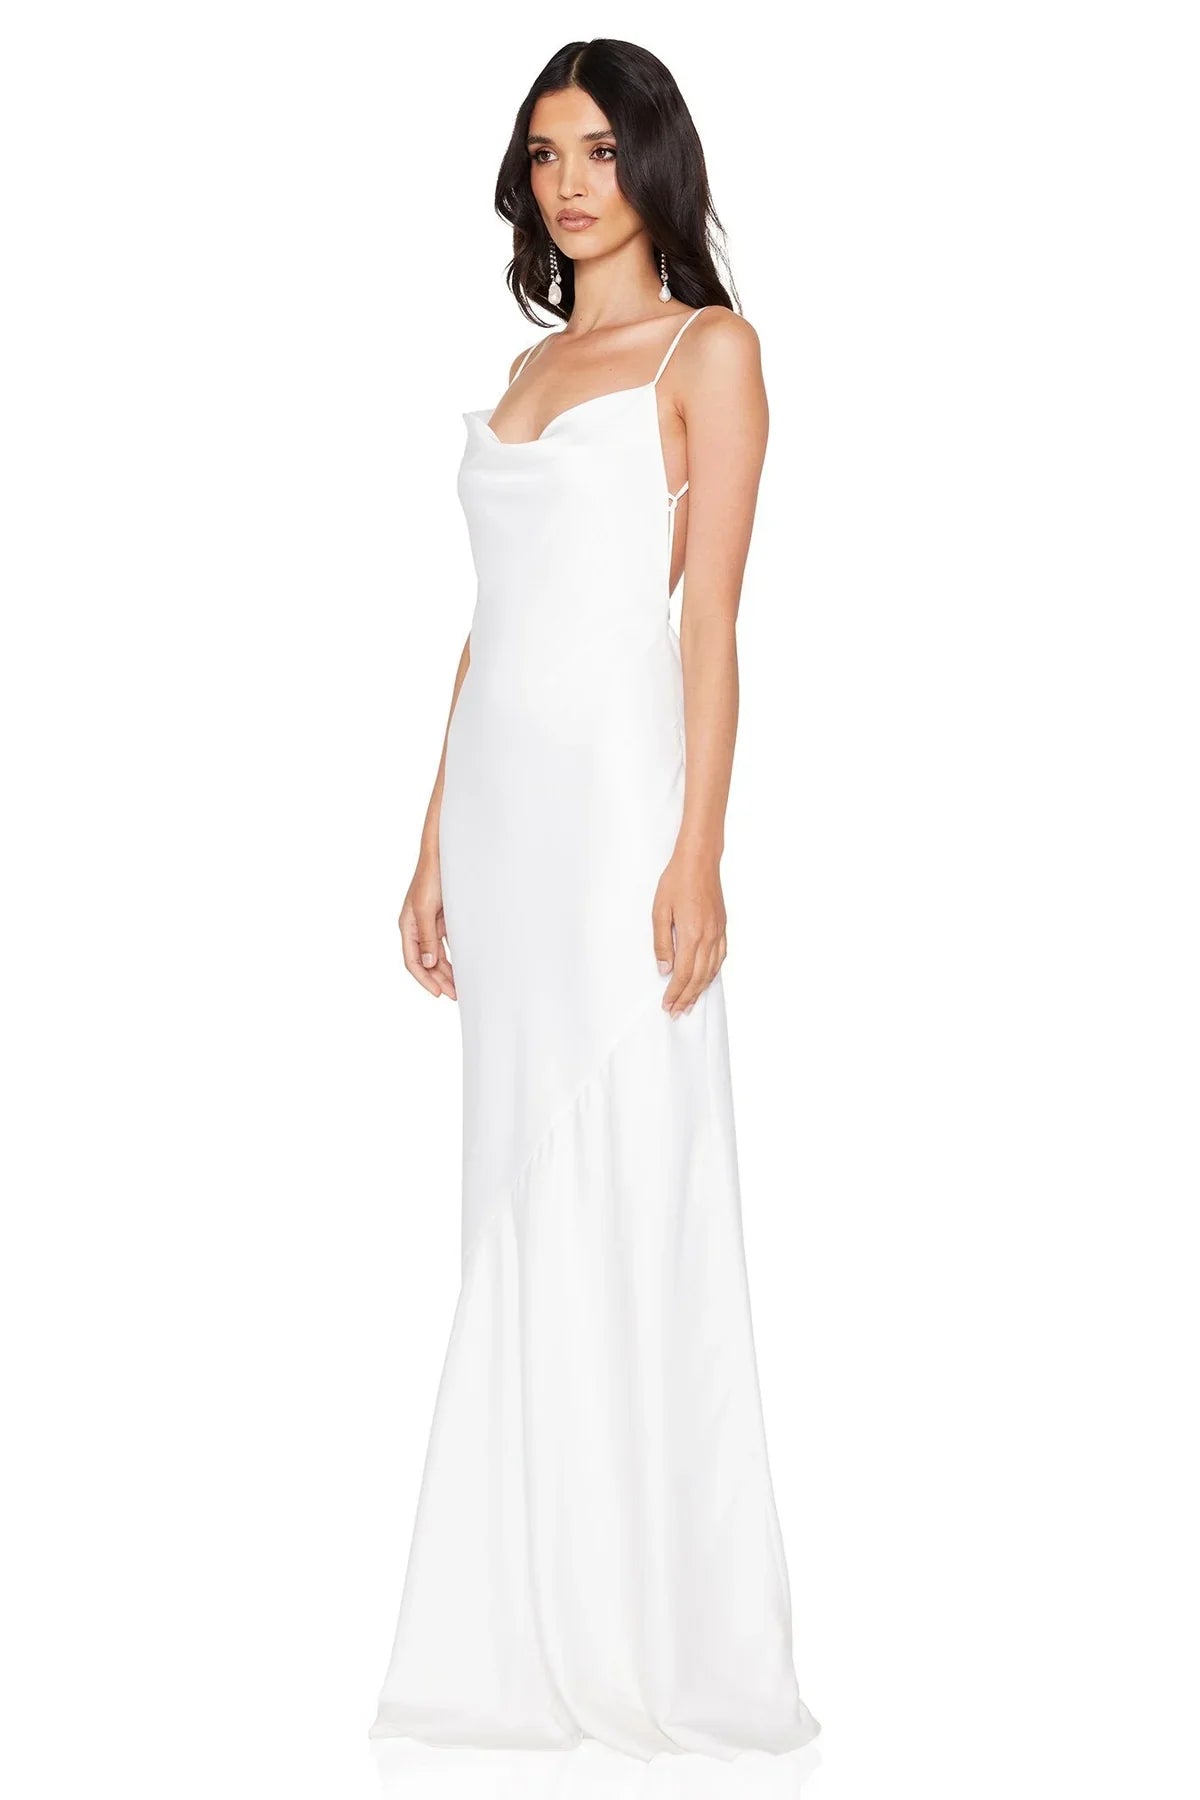 Entice Drape Gown in Ivory